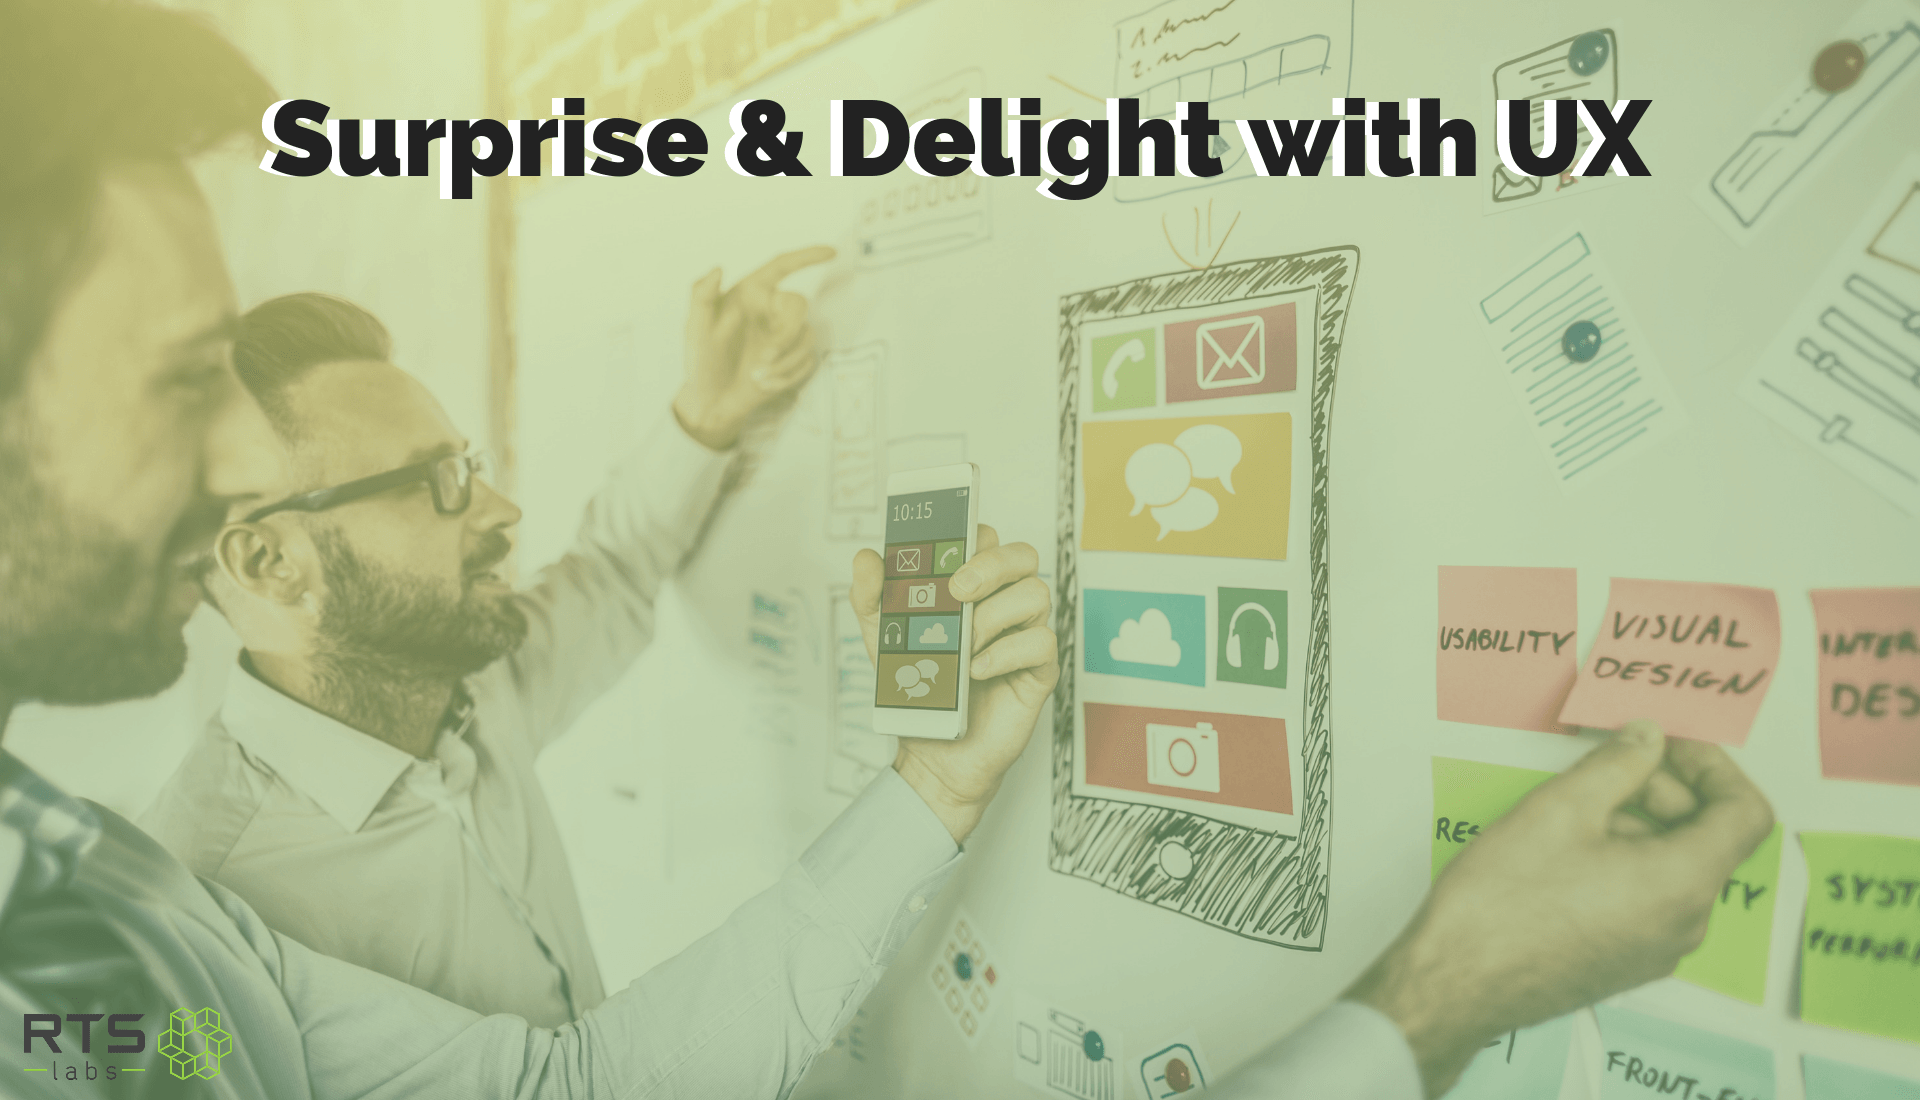 Surprise & delight with UX